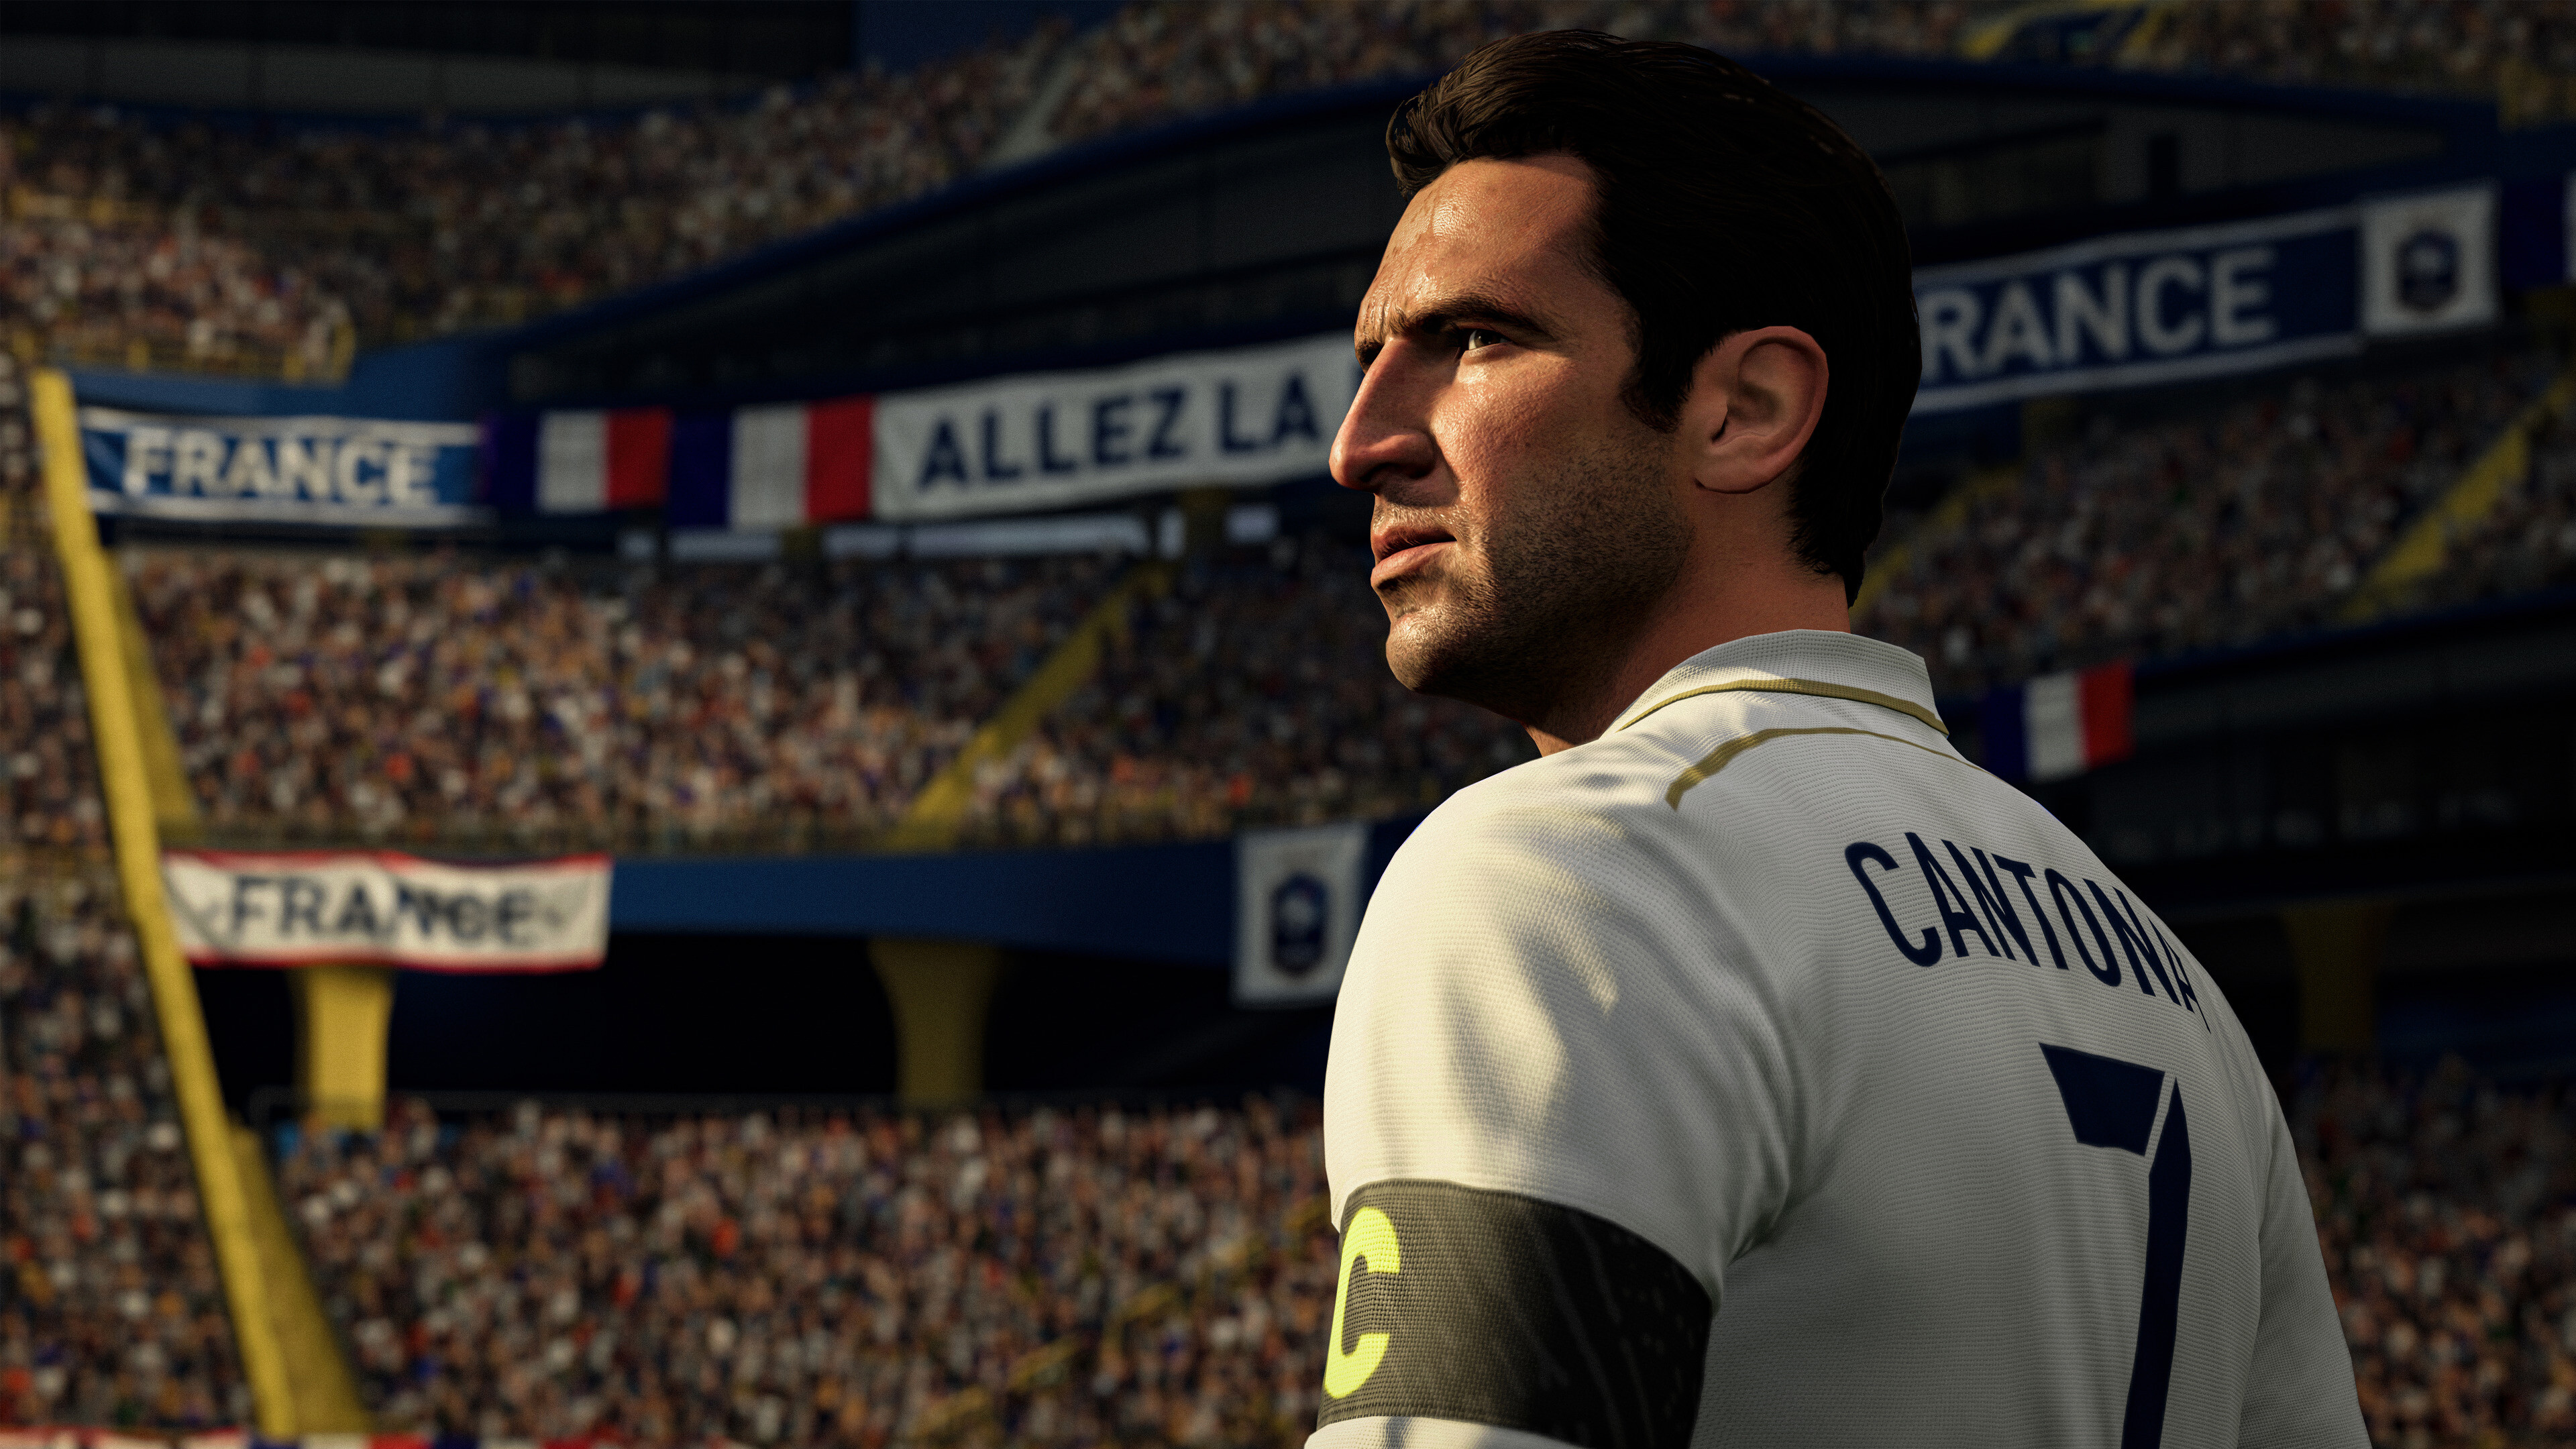 FIFA: Ultimate Team features 100 icon players, Eric Cantona. 3840x2160 4K Background.